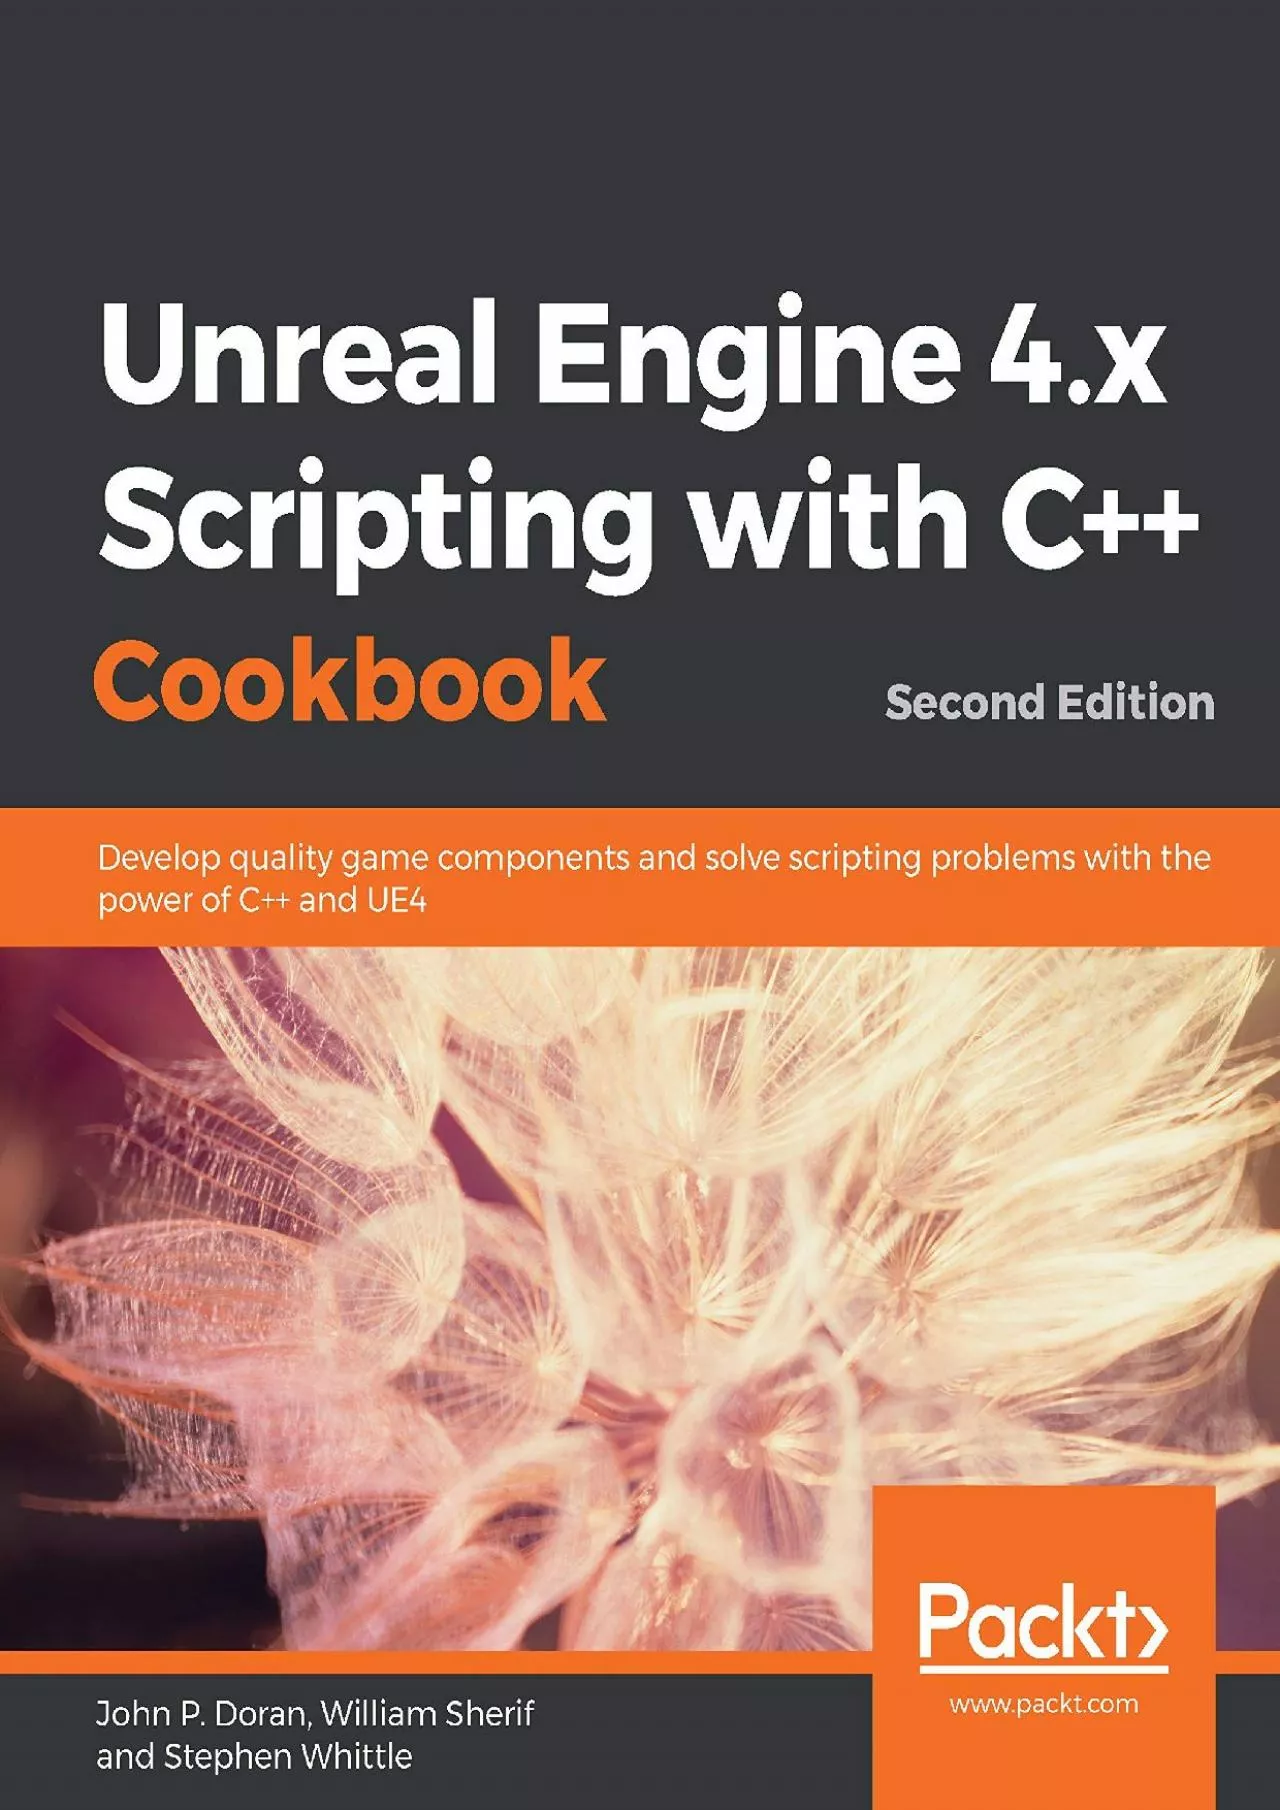 [eBOOK]-Unreal Engine 4.x Scripting with C++ Cookbook: Develop quality game components